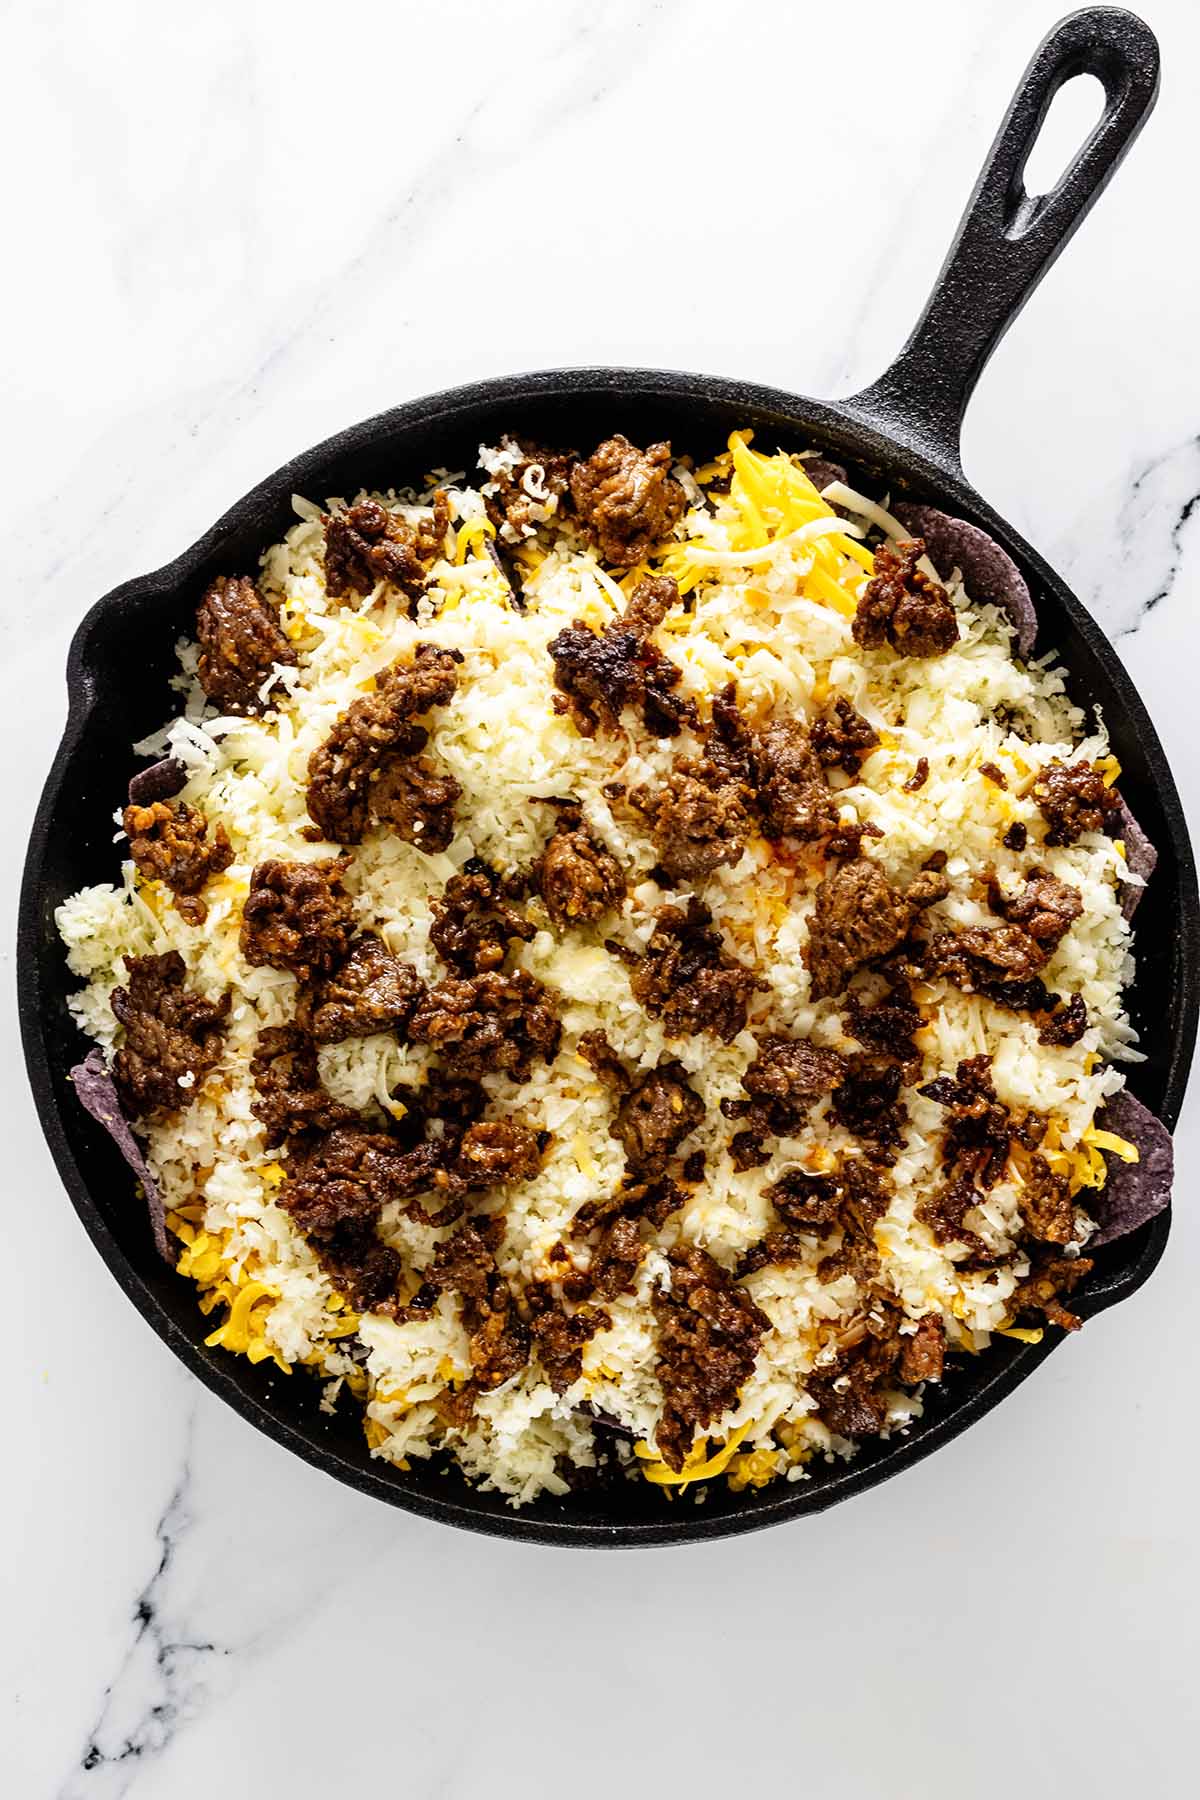 Overhead view of chorizo and shredded cheese added to a skillet on a white marble background.